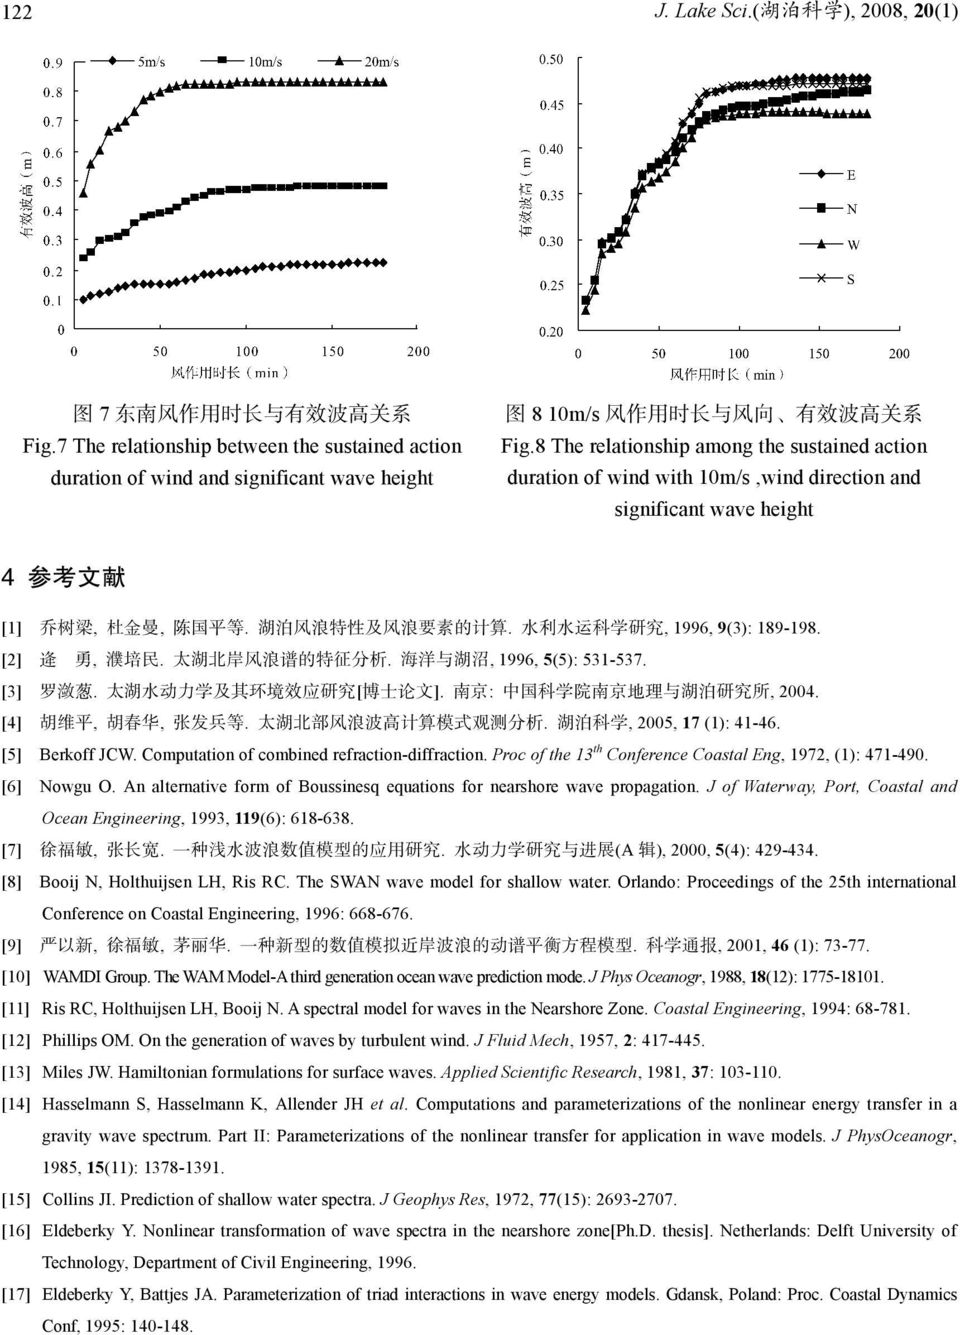 8 The relationship among the sustained action duration of wind with 10m/s,wind direction and significant wave height 4 参 考 文 献 [1] 乔 树 梁, 杜 金 曼, 陈 国 平 等. 湖 泊 风 浪 特 性 及 风 浪 要 素 的 计 算.